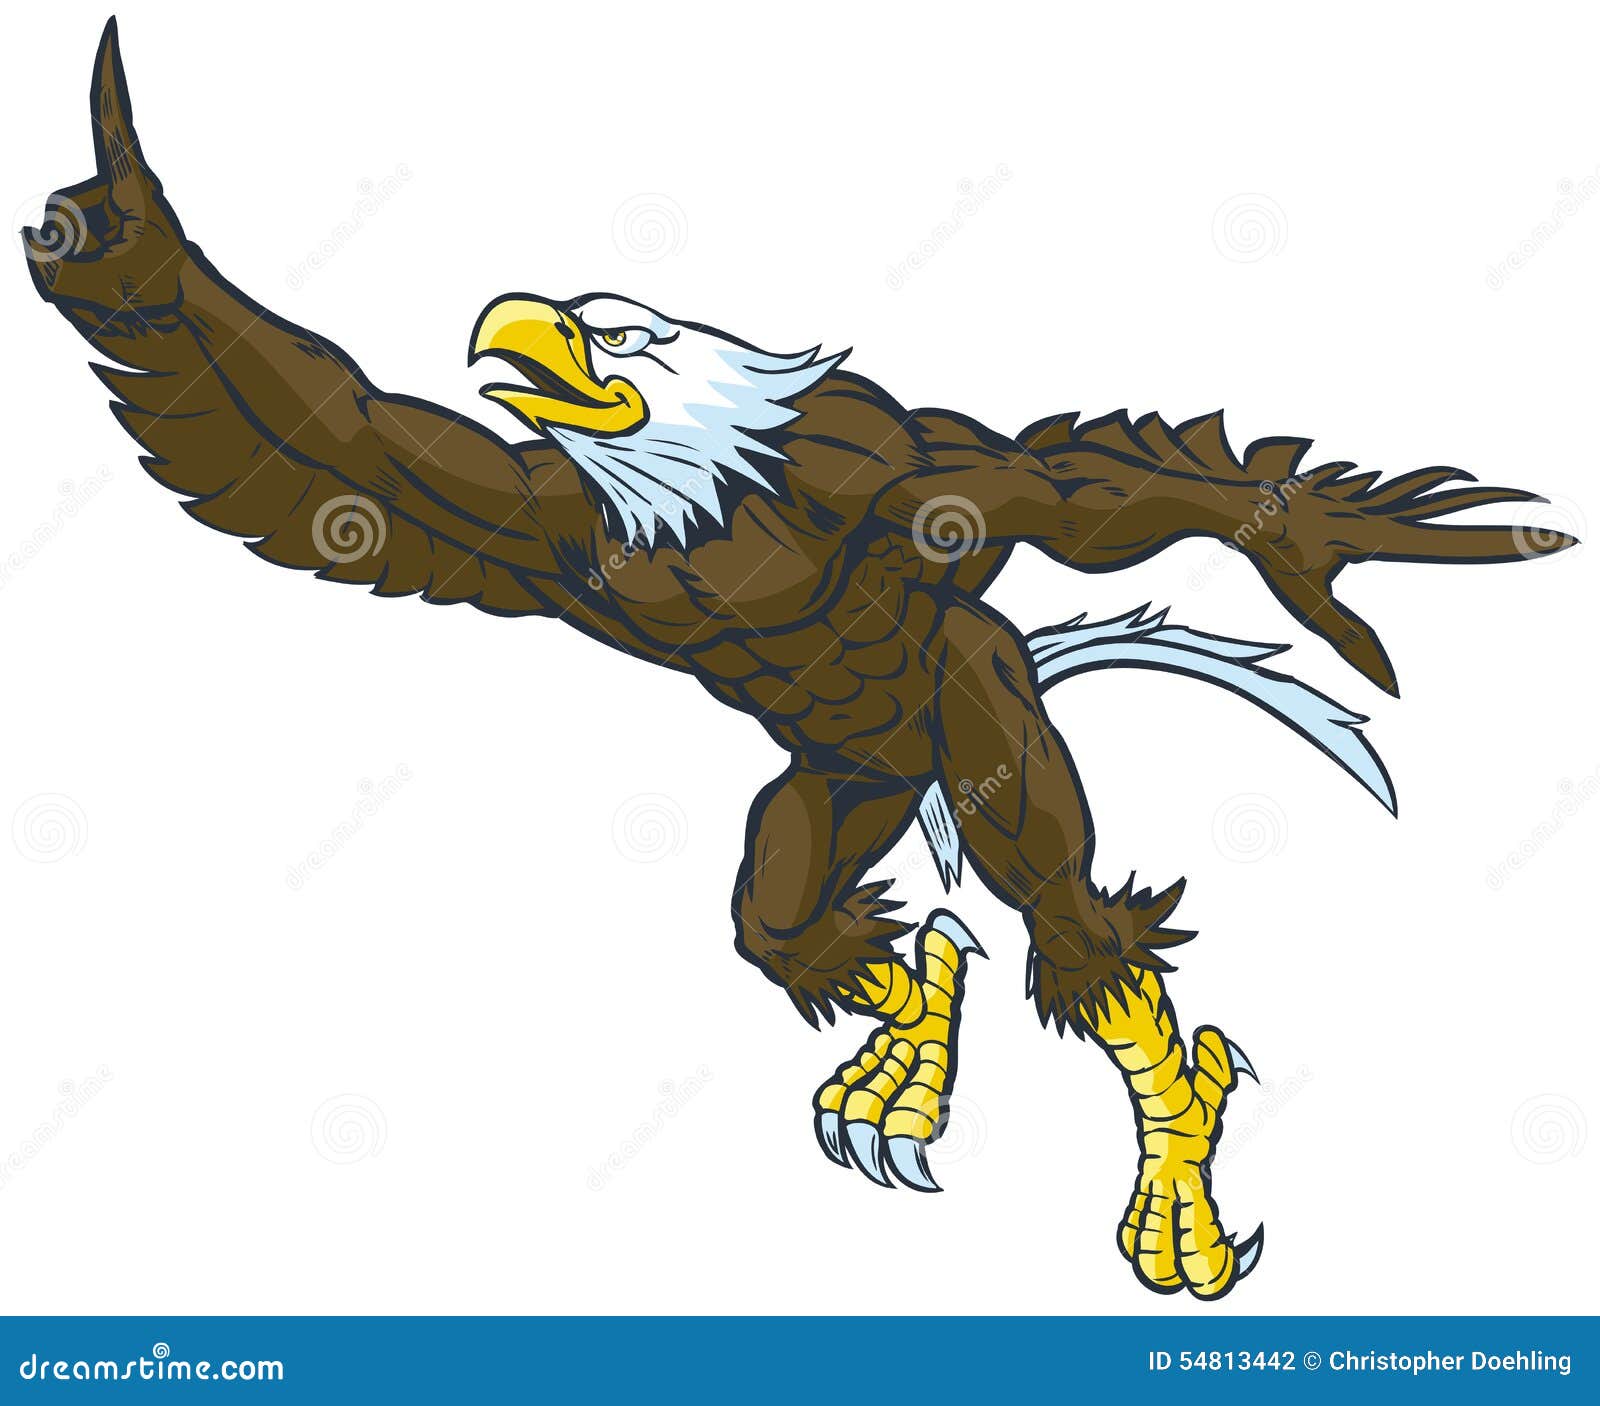 cartoon-bald-eagle-mascot-doing-number-one-gesture-vector-clip-art-illustration-tough-muscular-leaping-flying-forward-54813442.jpg